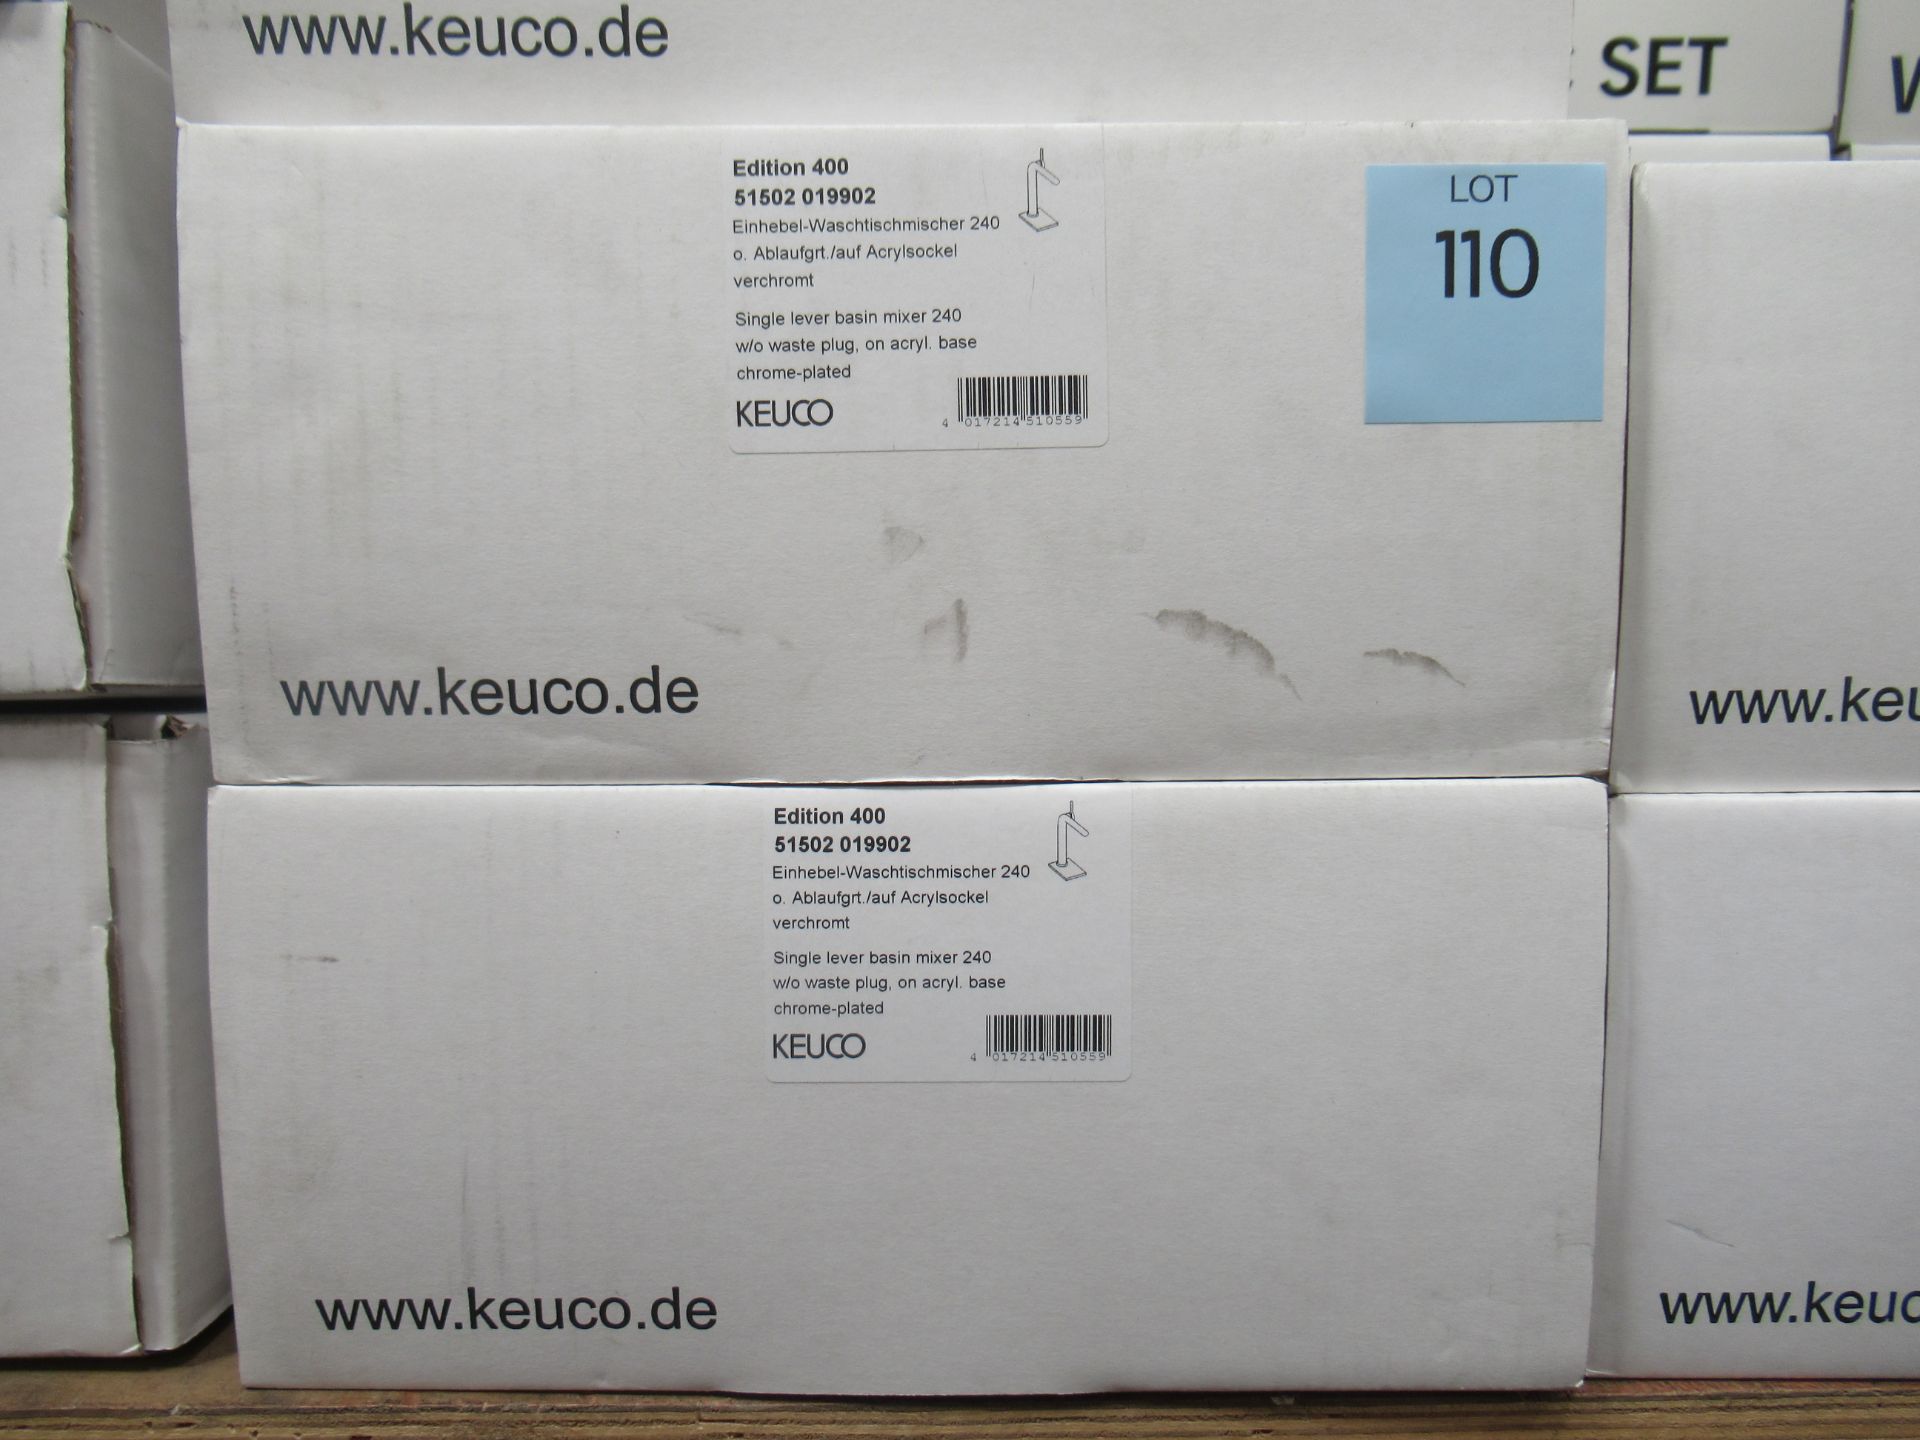 2 x Keuco Edition 400 Single Lever Basin Mixer 240-Tap, Chrome Plated, P/N 51502-019902